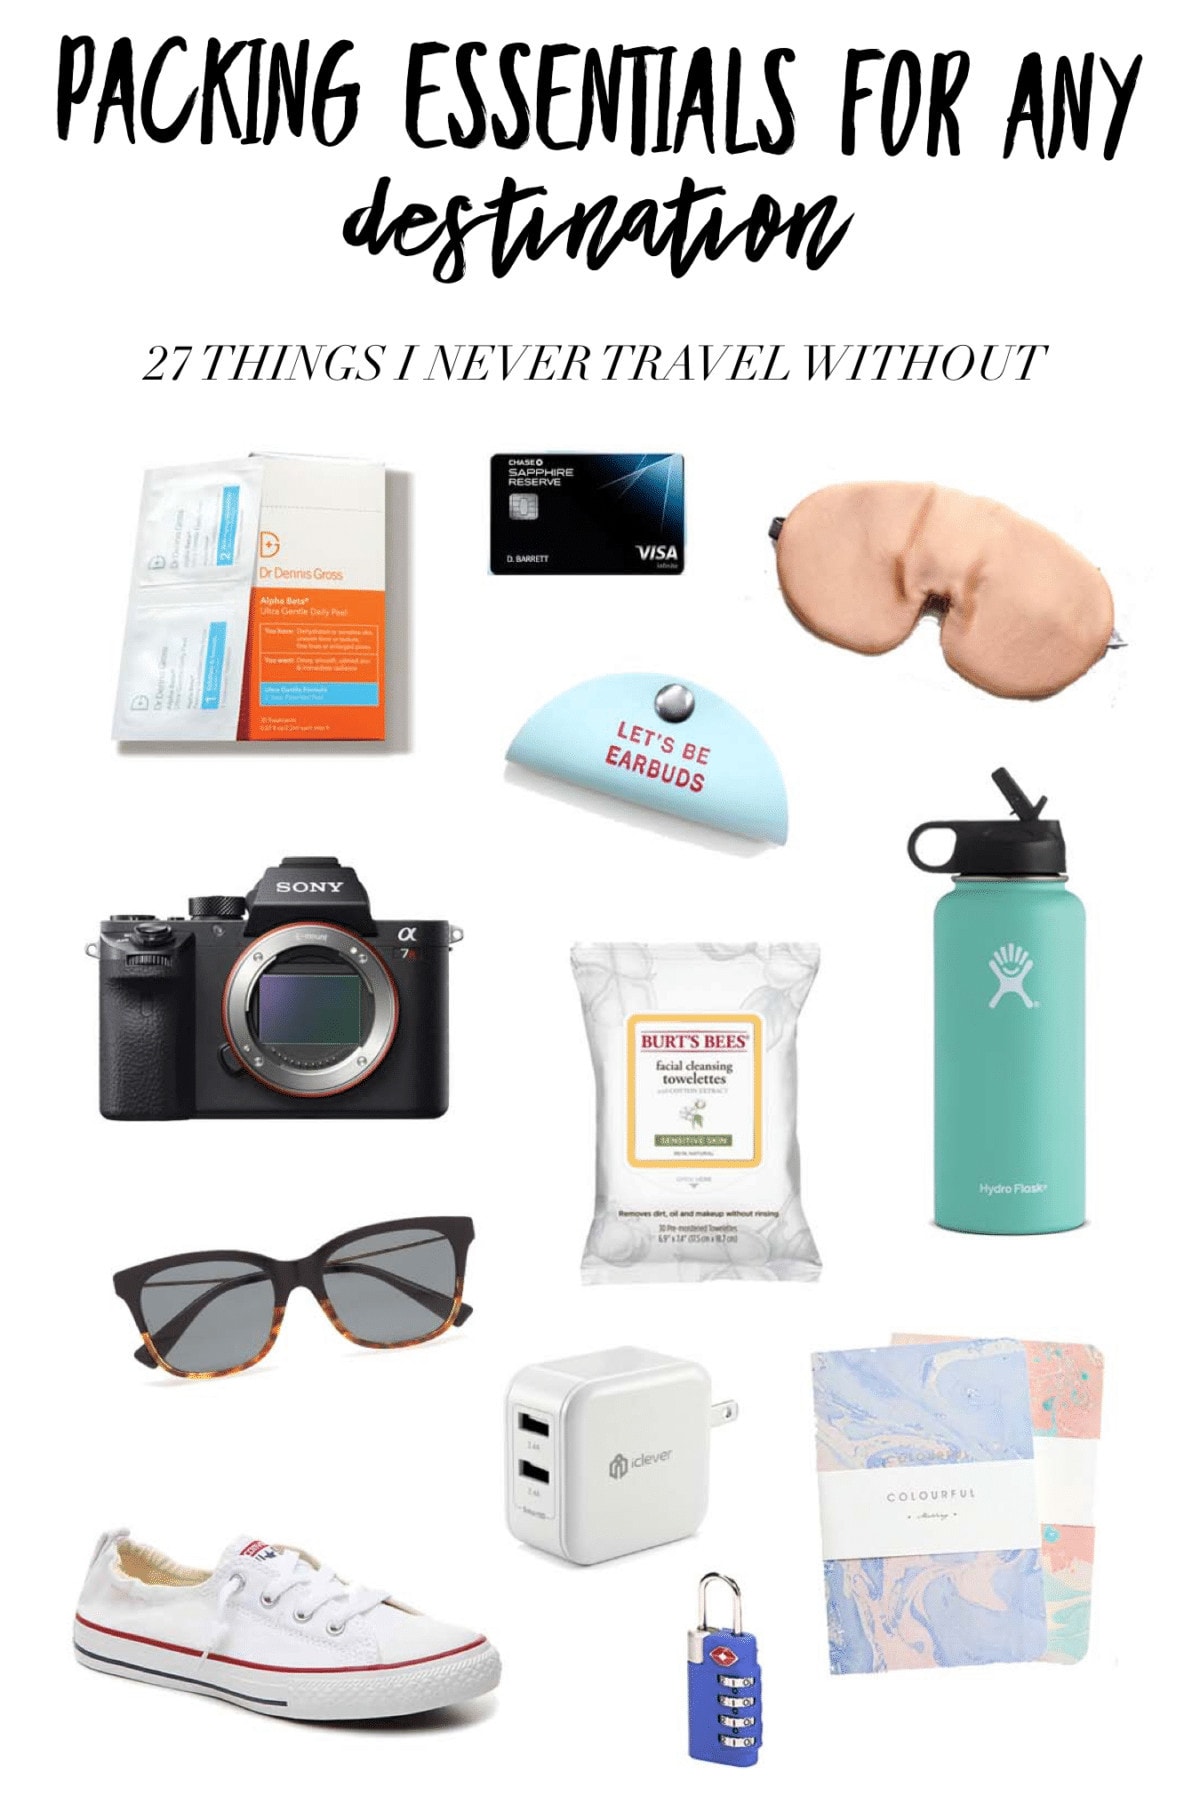 Packing Essentials for Any Destination: 27 Things I Never Travel Without